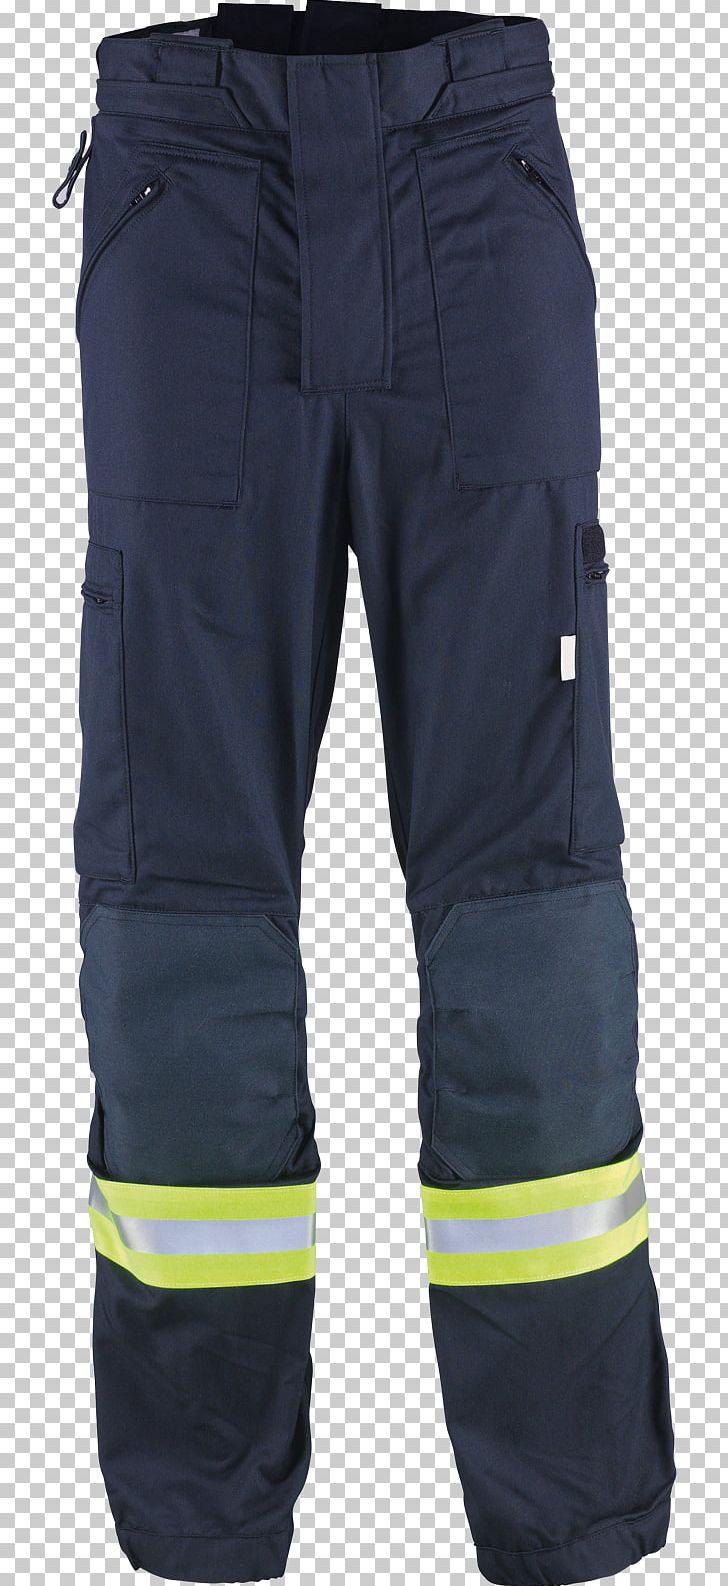 Jeans Pants Station Wear Texport HandelsgesmbH Clothing PNG, Clipart, Clothing, Fire Department, Fire Hose, Fly, Hockey Protective Pants Ski Shorts Free PNG Download